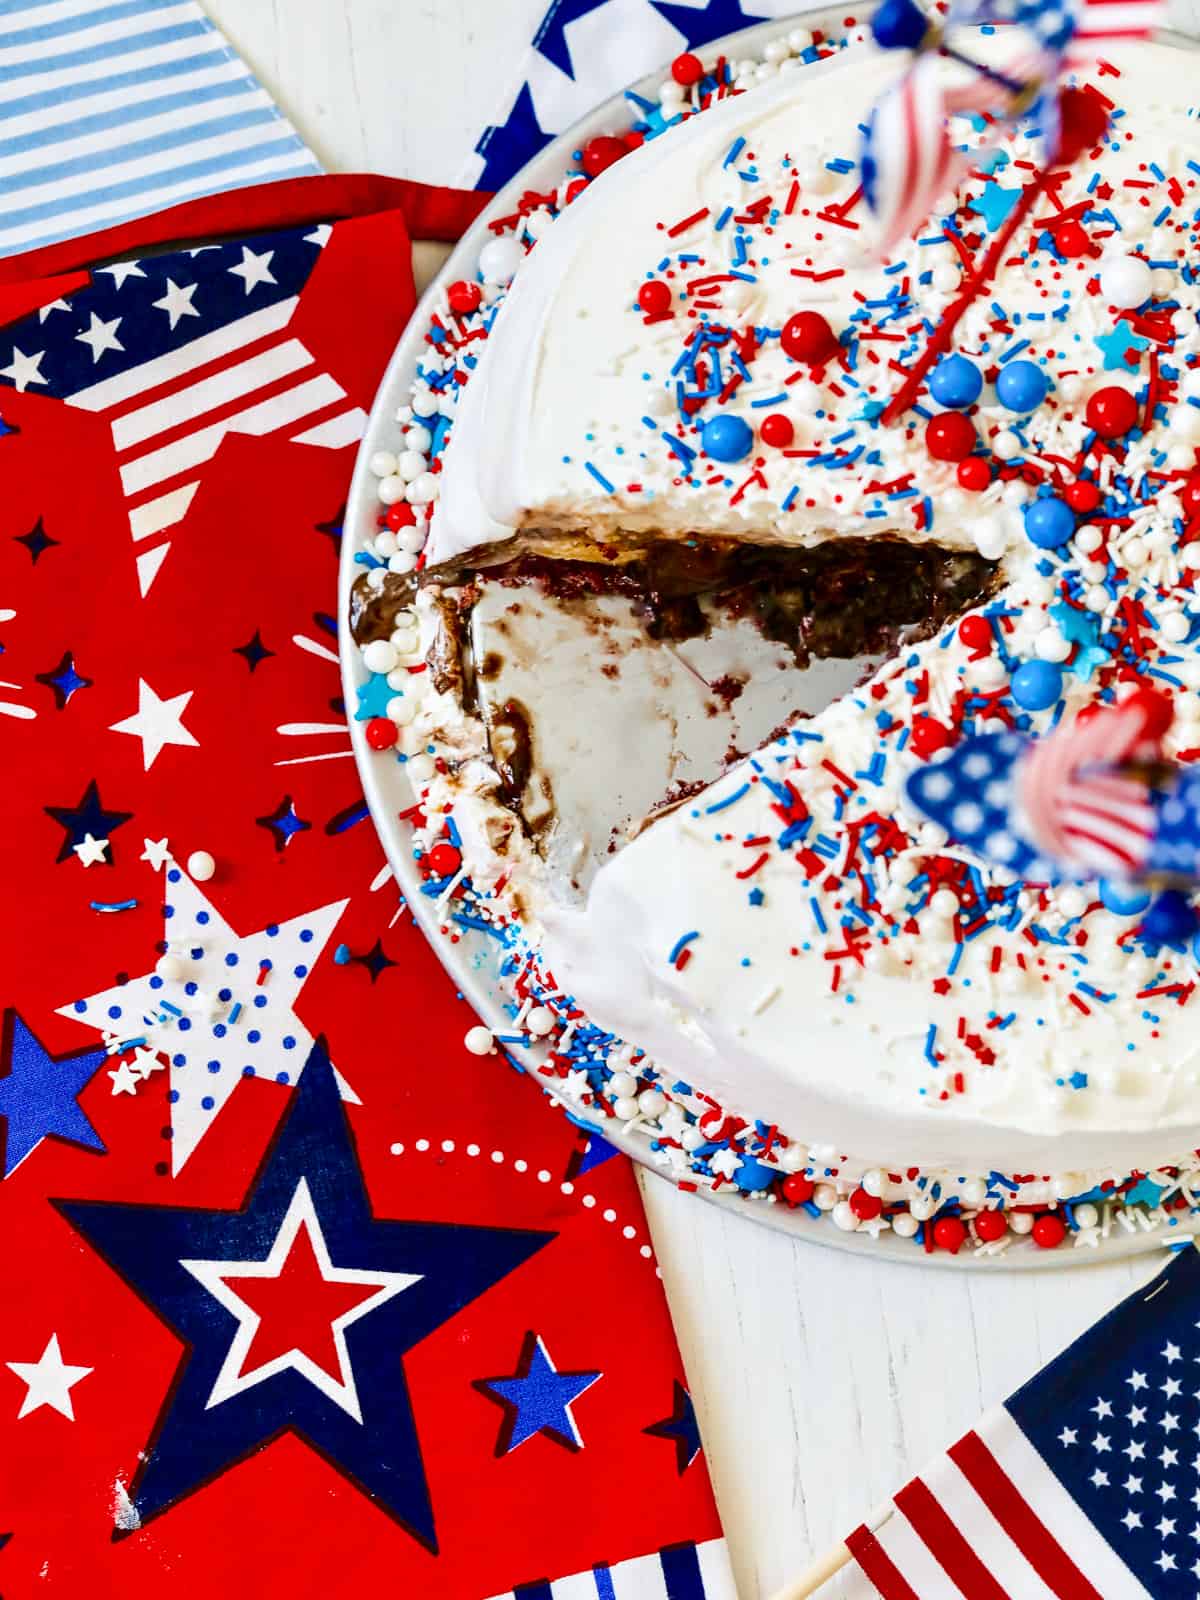 An ice cream cake for July 4th with a slice cut out of it on a patriotic red, white, and blue star tablecloth.